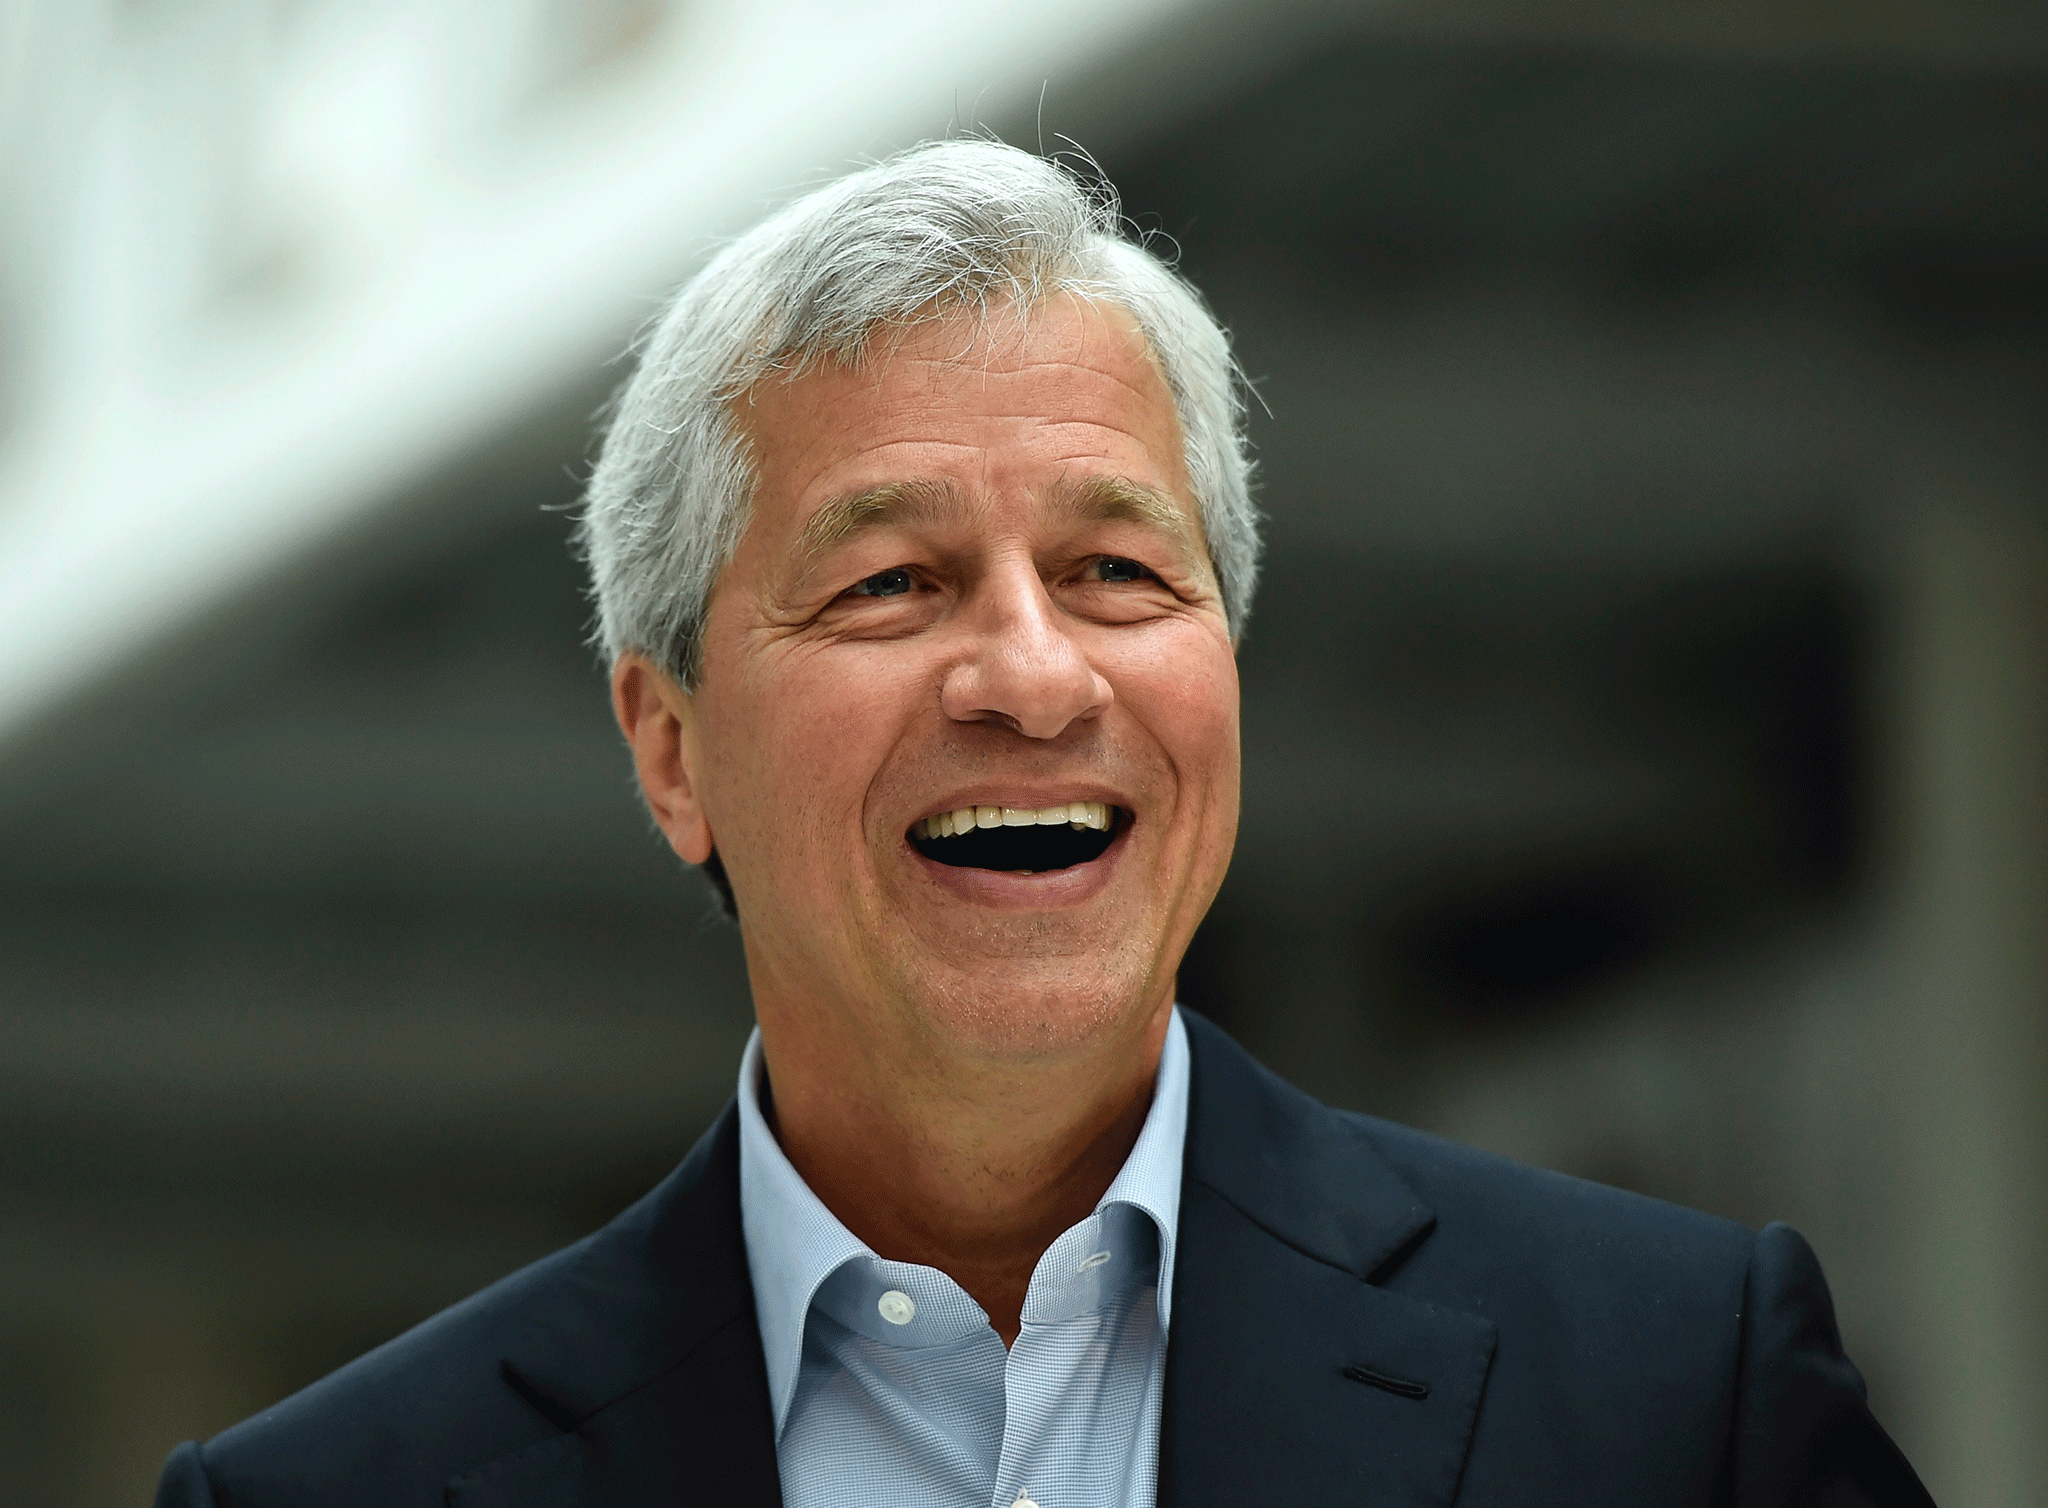 Mr Dimon said on Tuesday the bank is still preparing for a hard Brexit in which Britain loses access to EU's single market